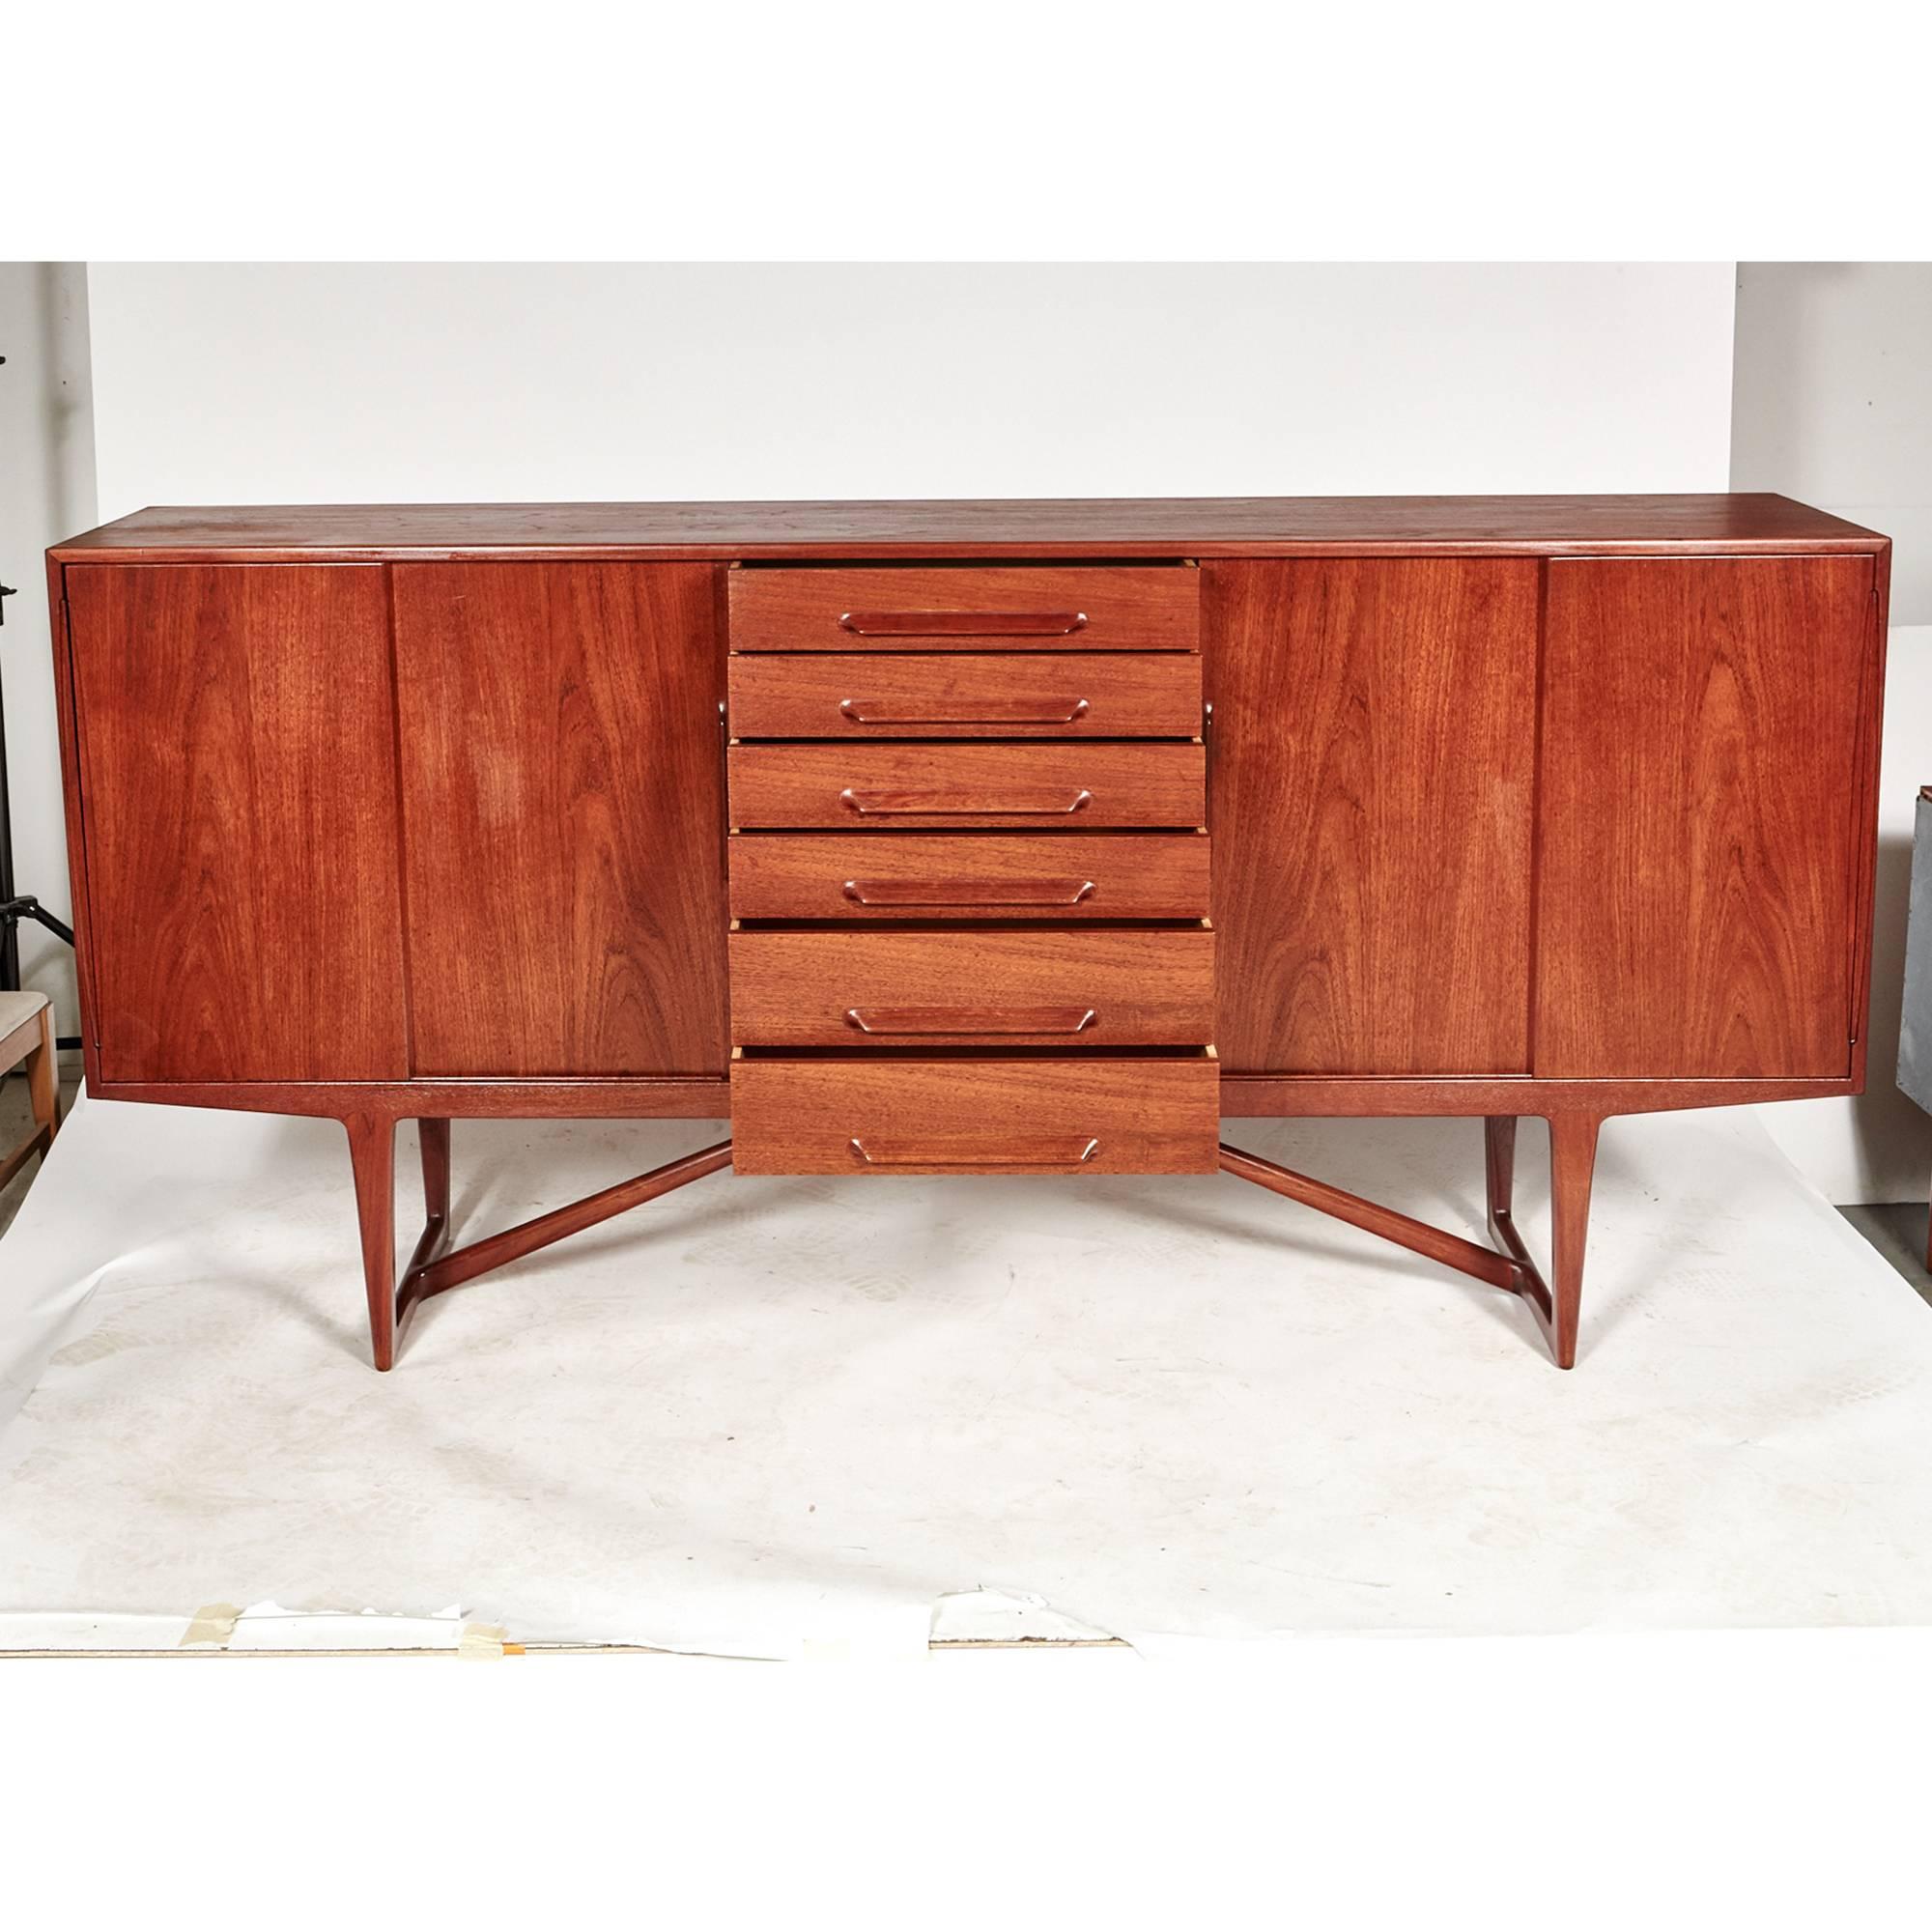 Kurt Østervig designed teak sideboard for Brande Mobelindustri in Denmark, early 1950s. Interior has adjustable shelves and six drawers with sculpted handles. Base has a cross stretcher for support. Excellent condition.